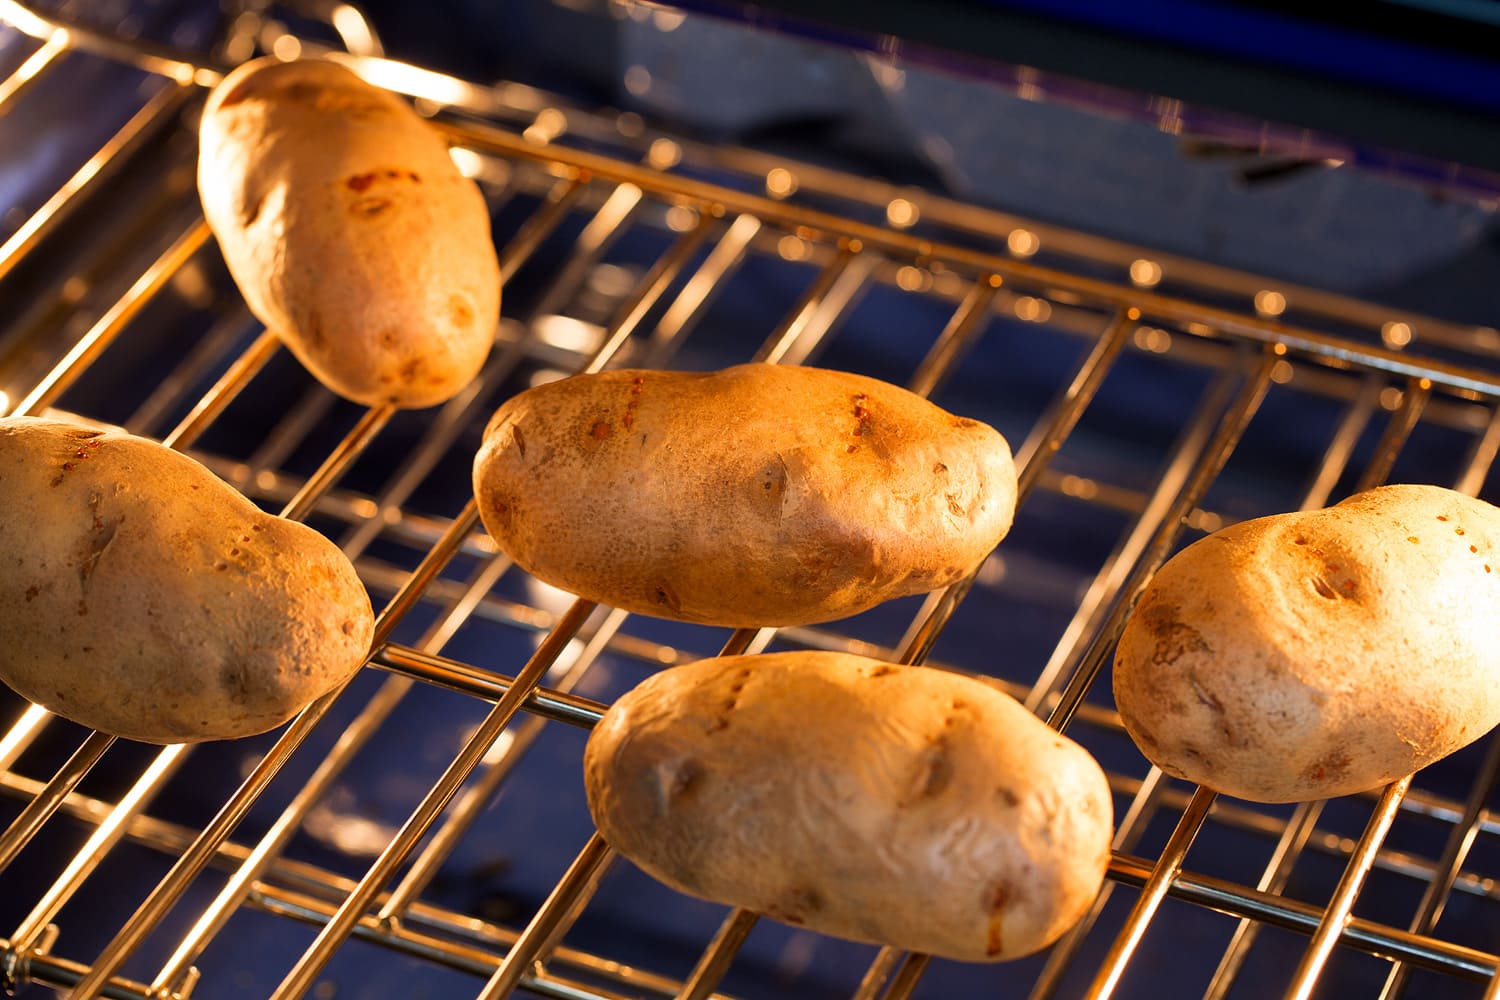 Five baked potatoes in oven.